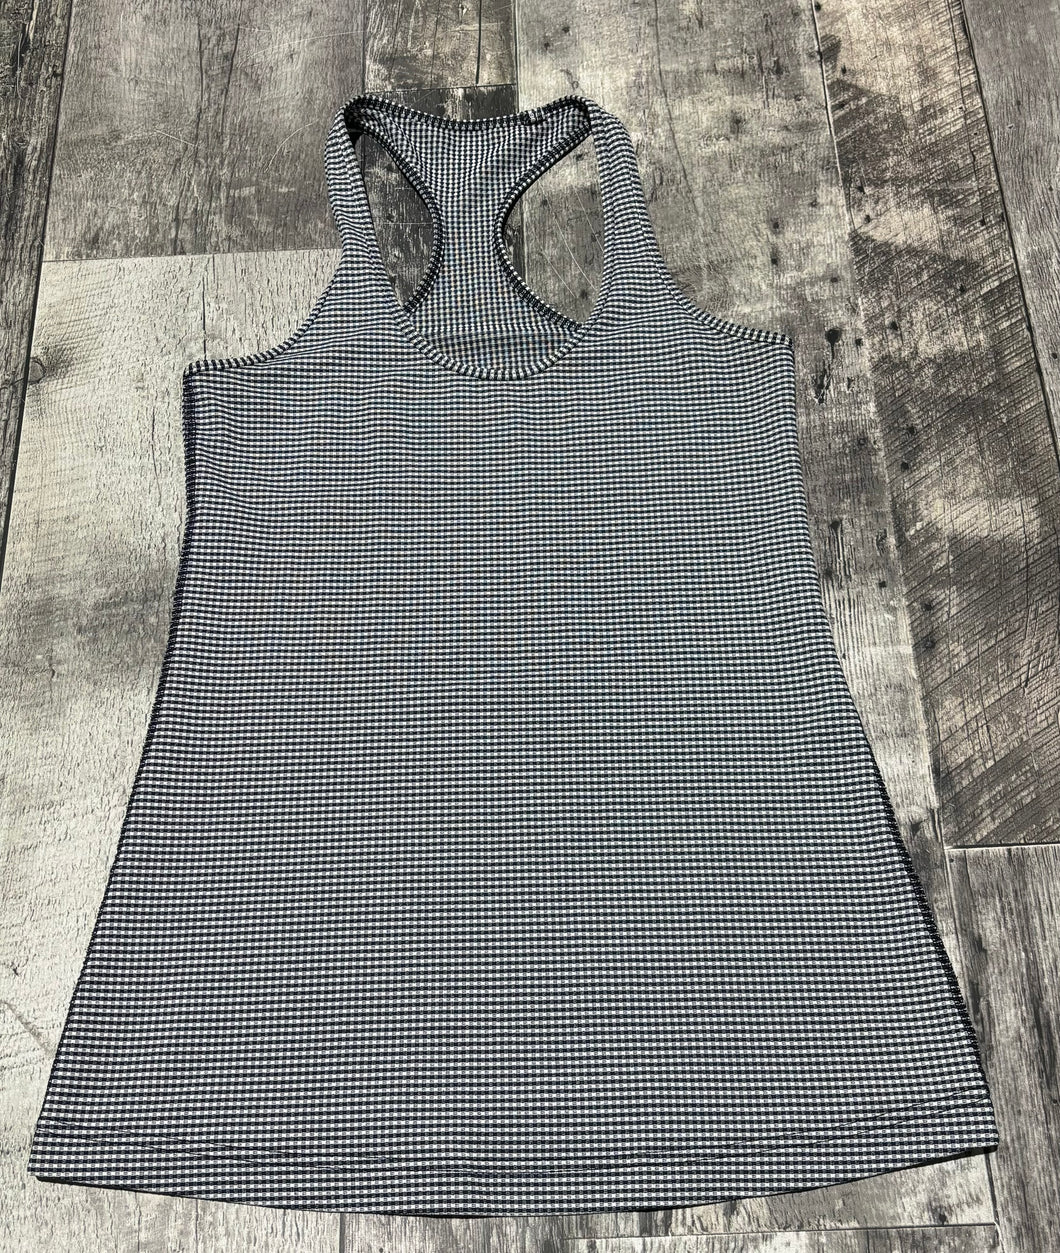 lululemon navy/white tank top - Hers size approx S